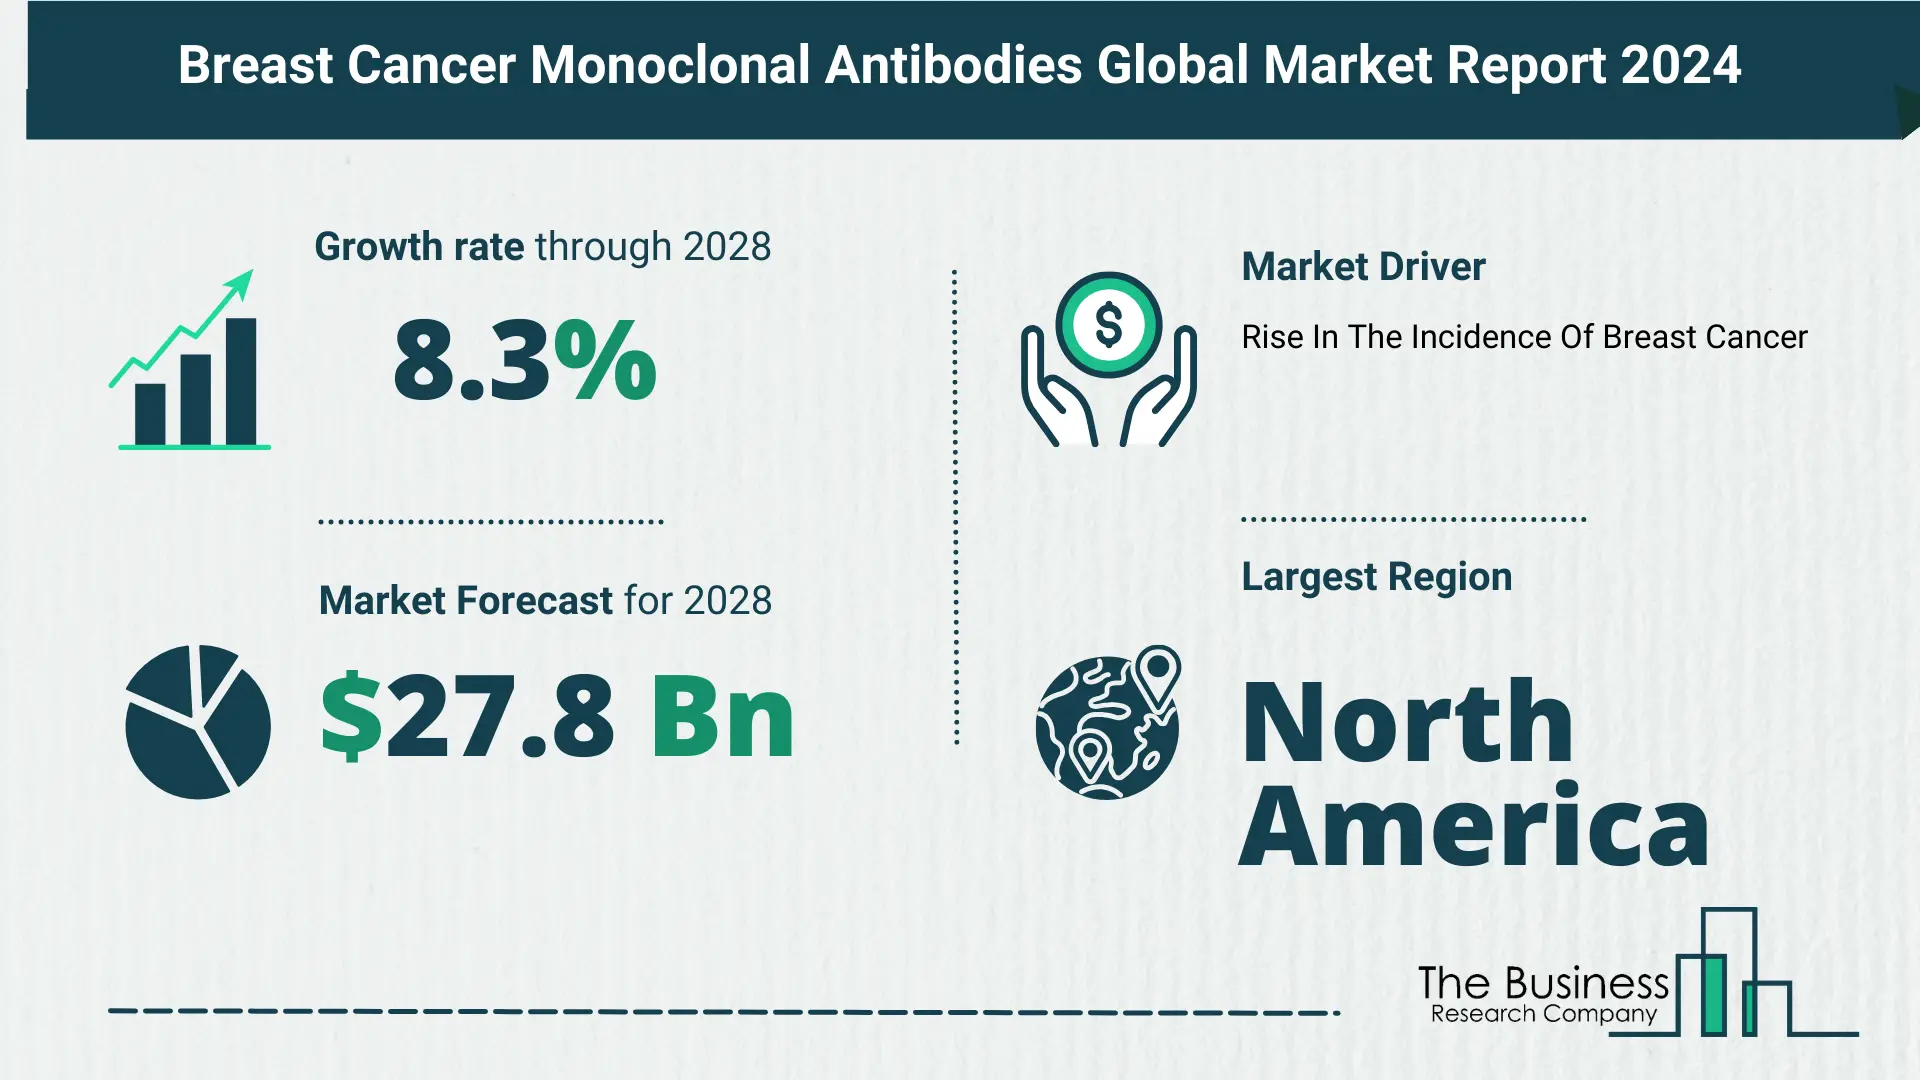 Breast Cancer Monoclonal Antibodies Market Report 2024: Market Size, Drivers, And Trends